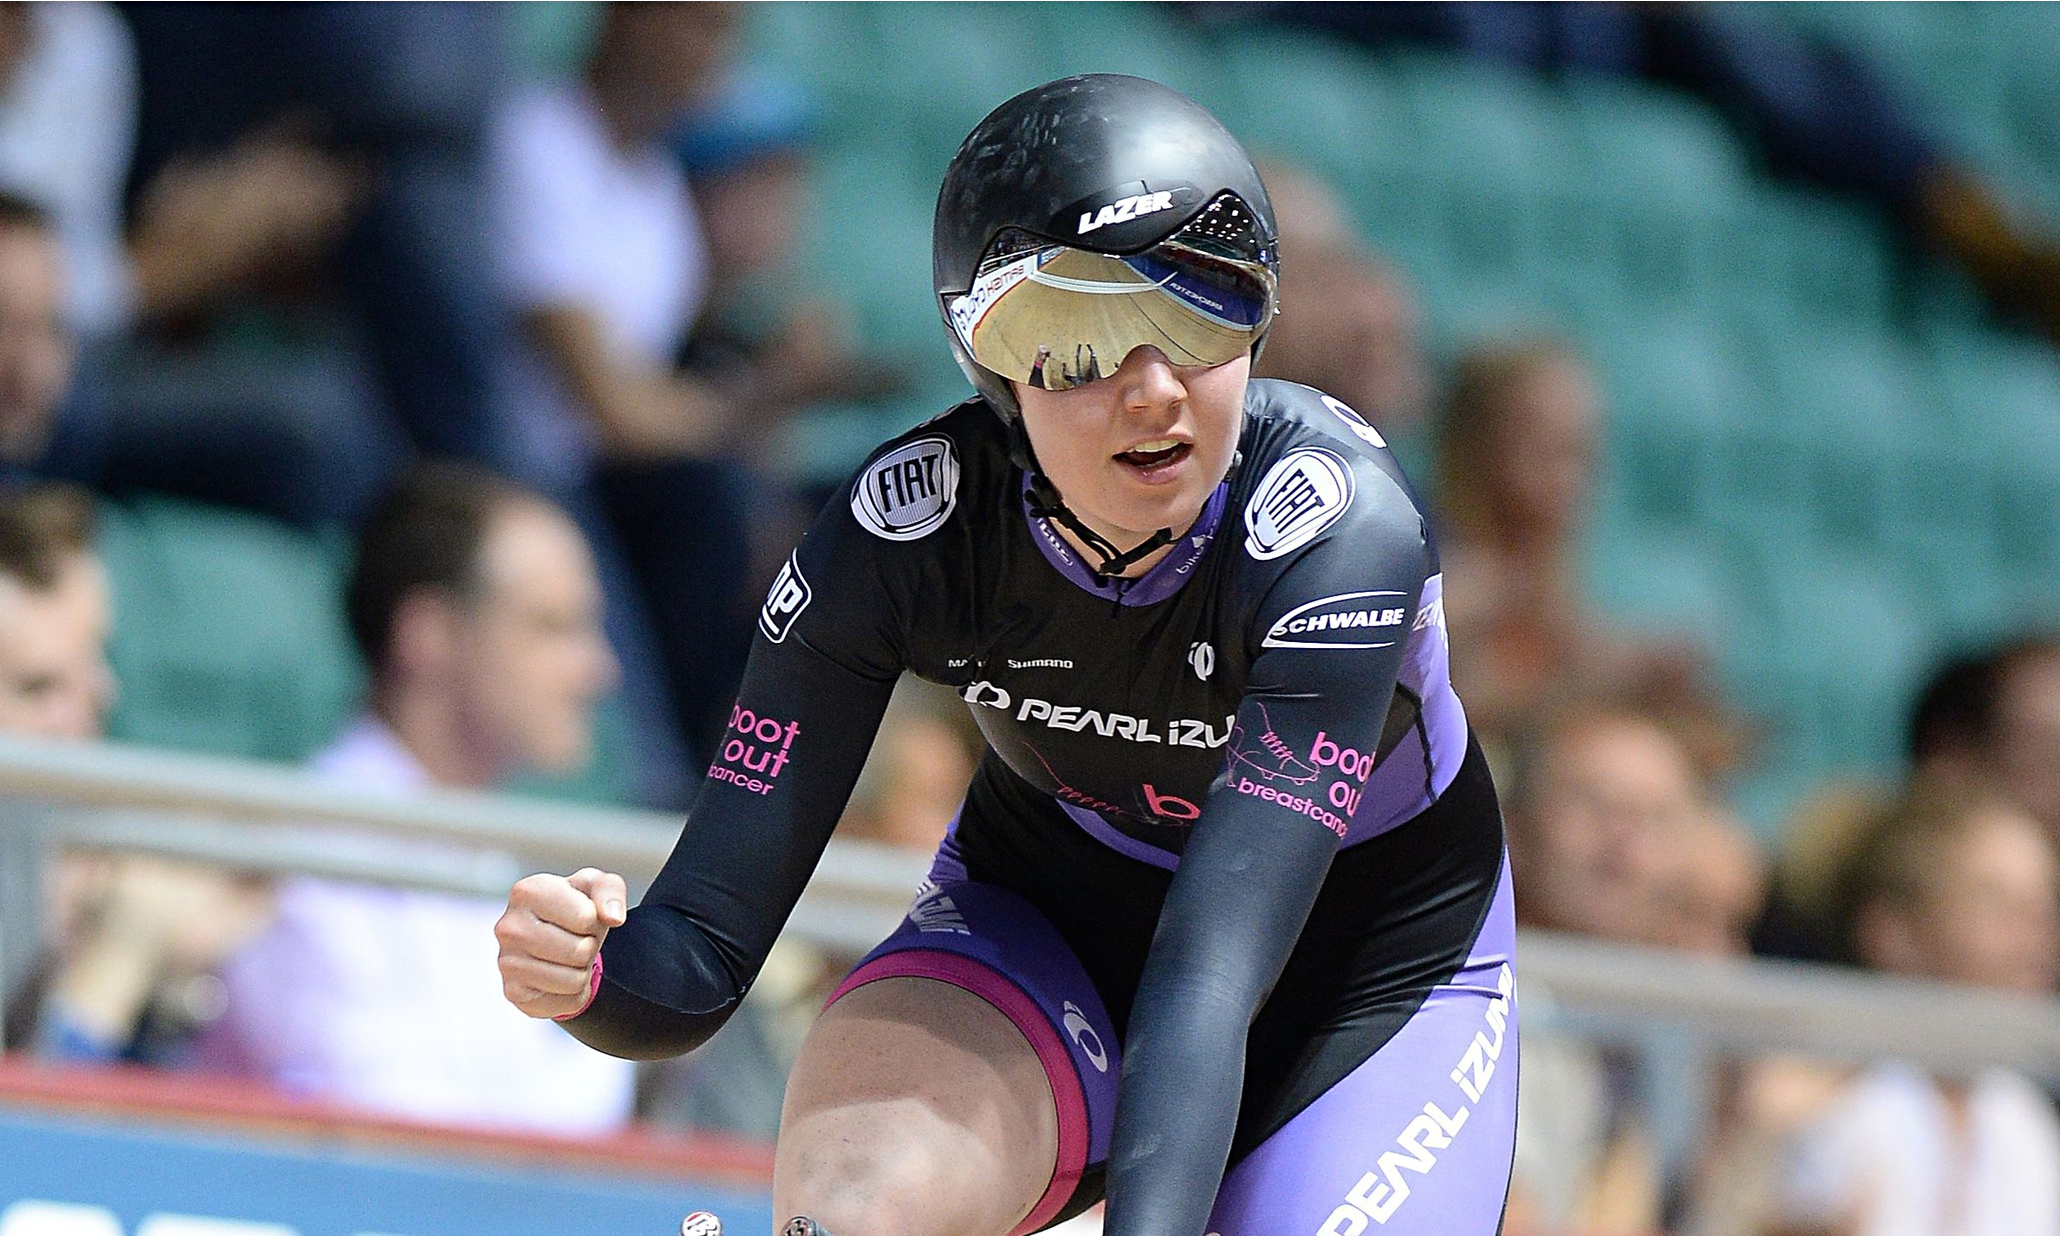 What Katie Archibald Does Next In Paris Could Help On The Road To Rio